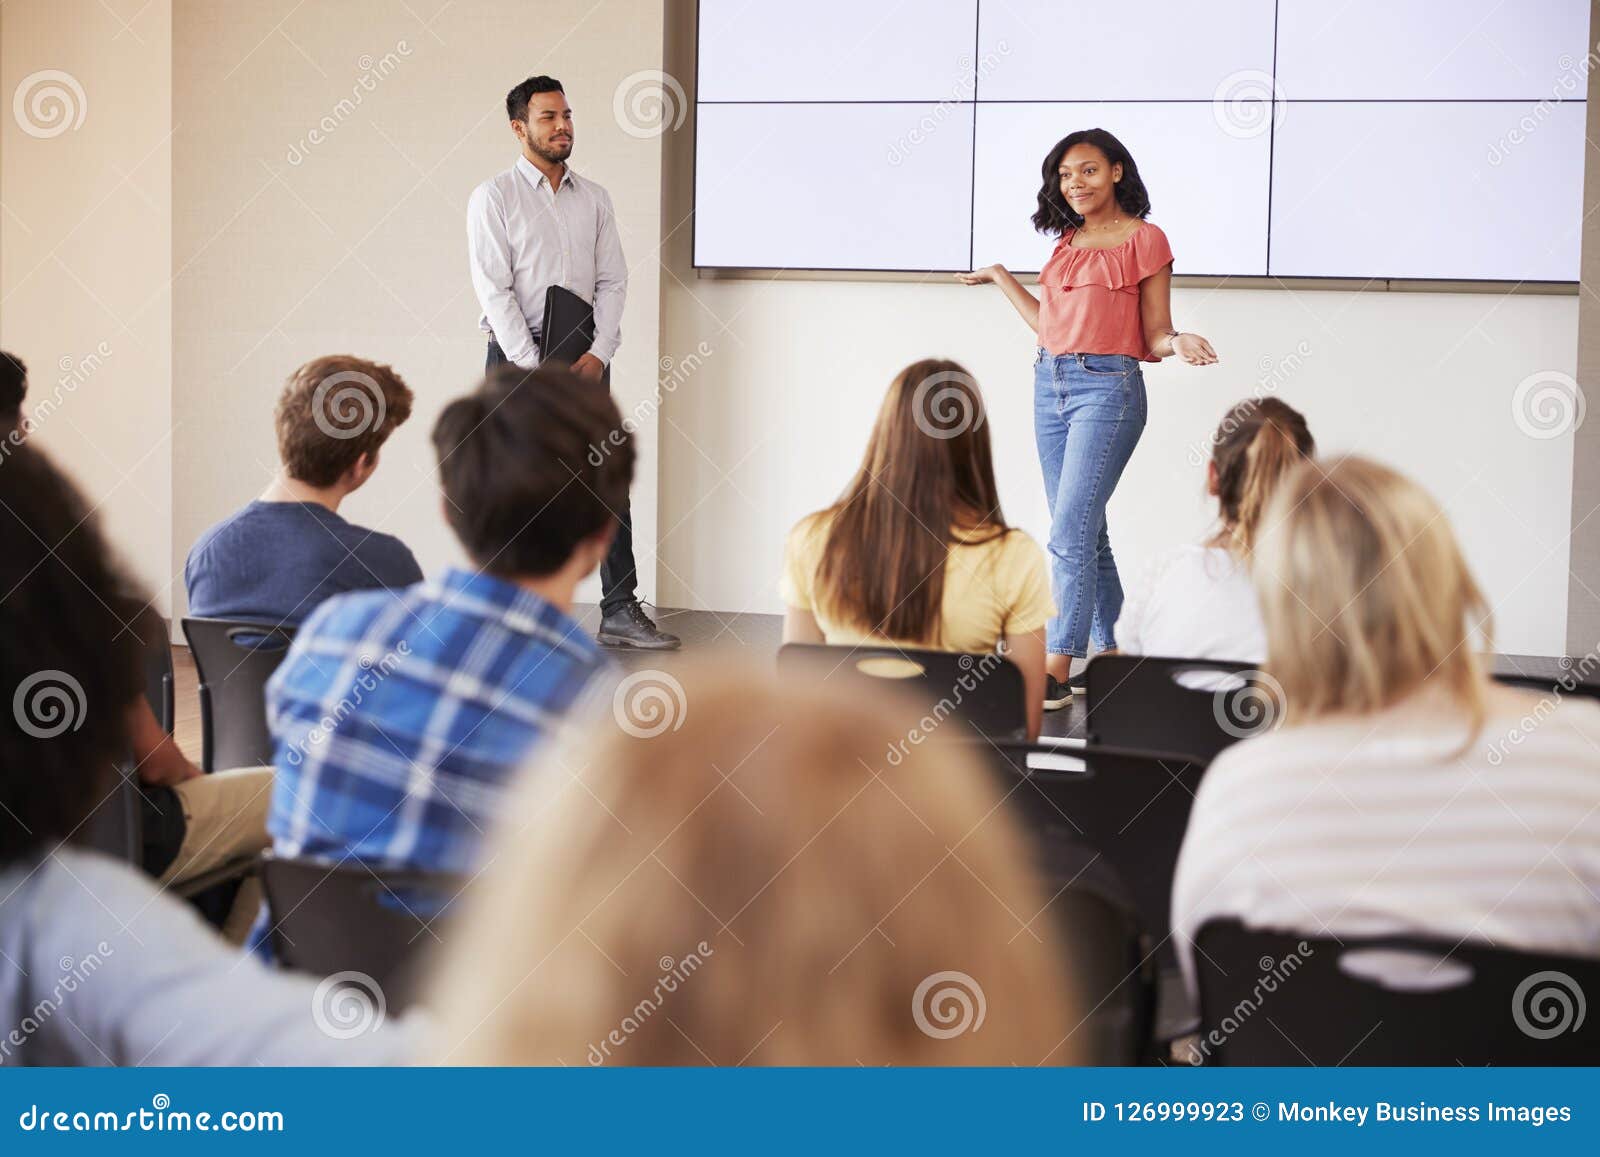 join a presentation session student